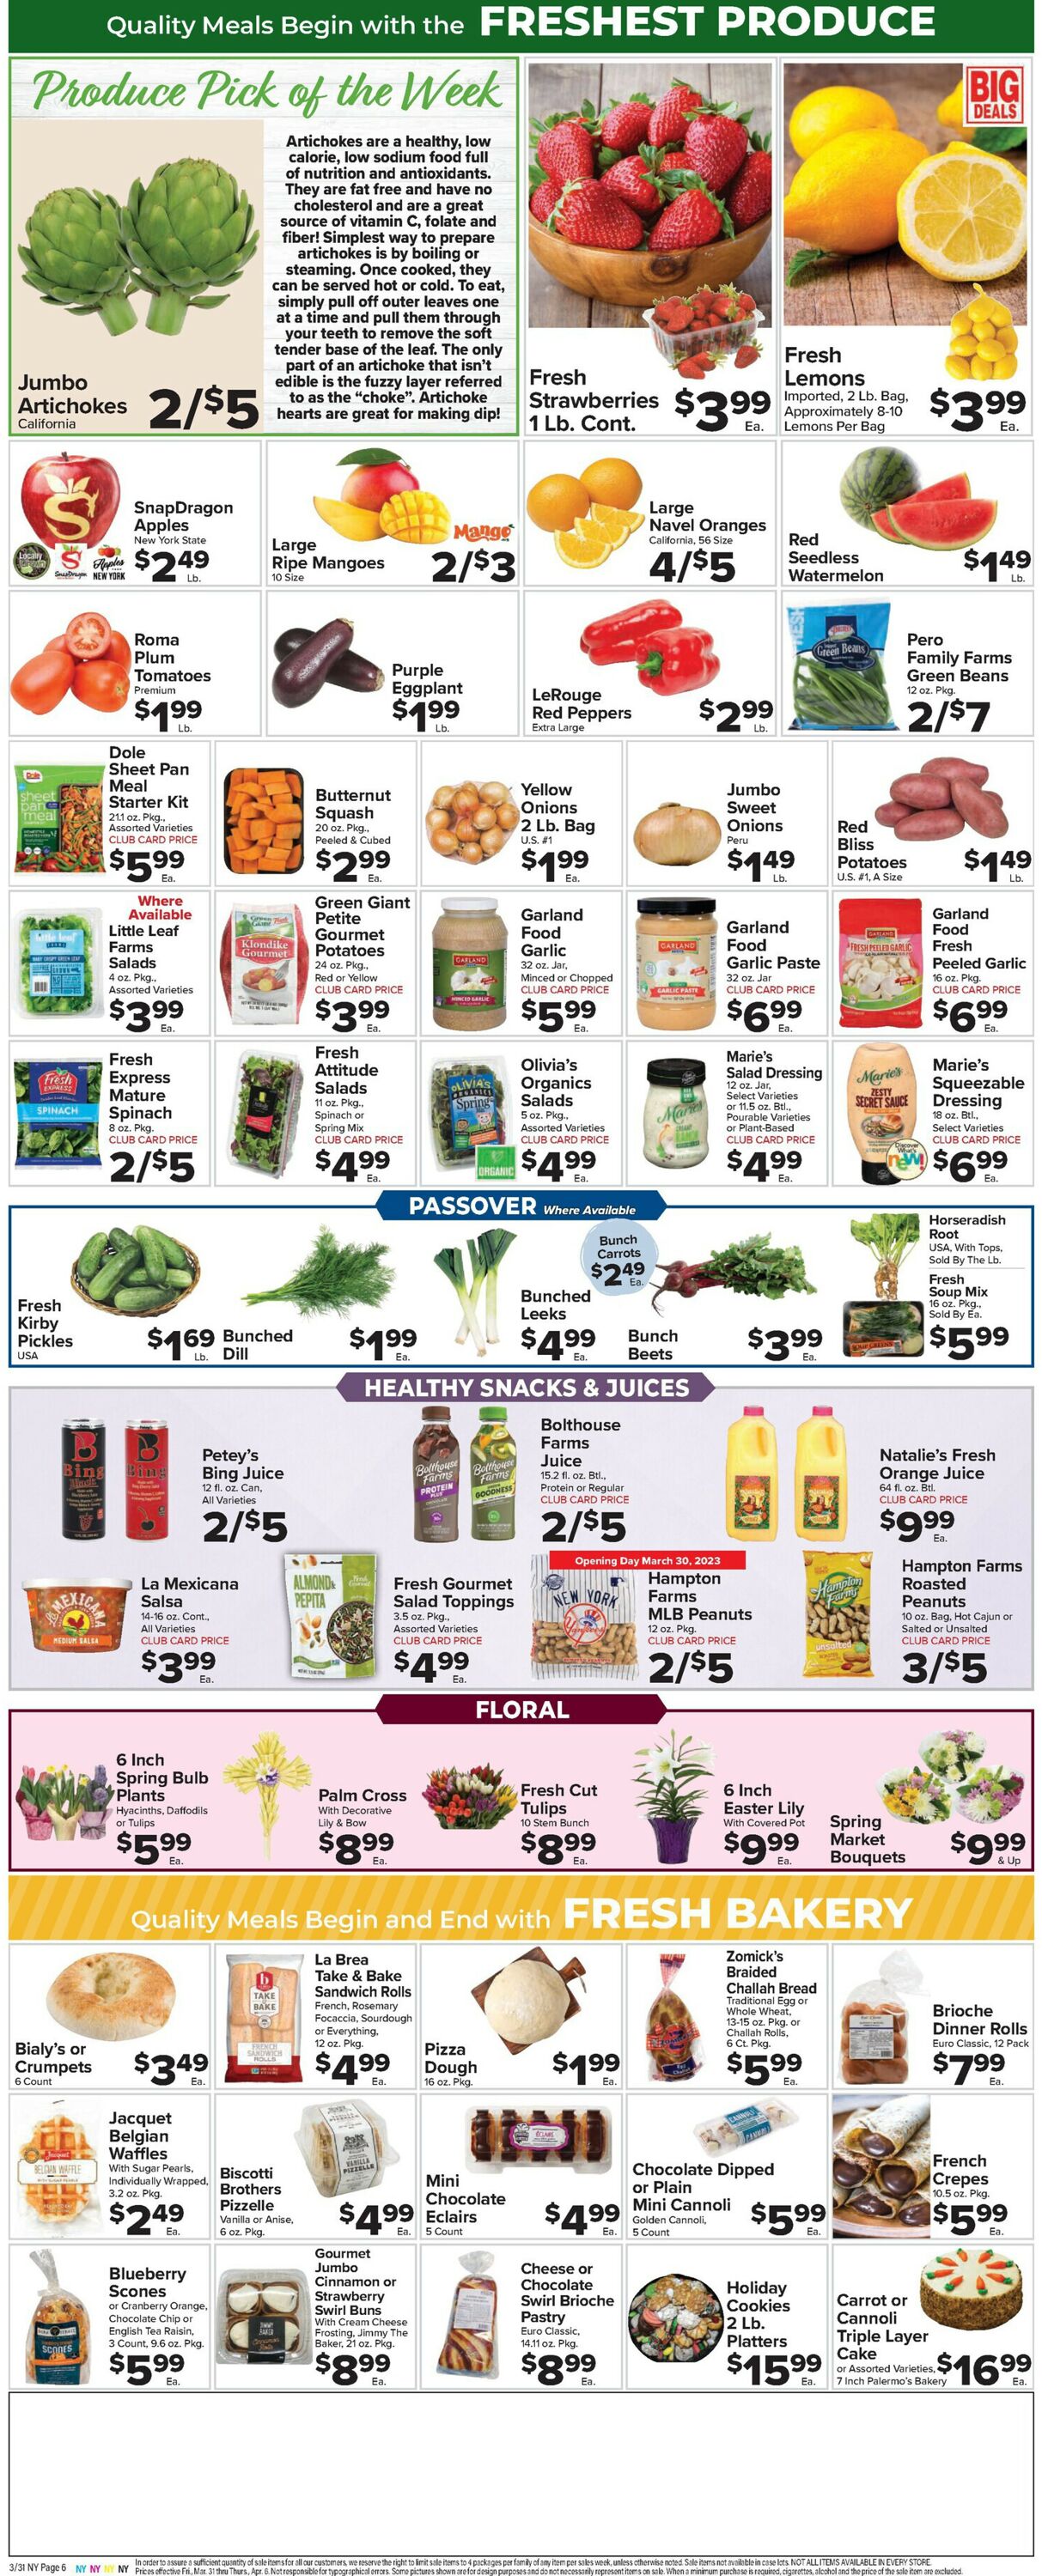 Foodtown Ad from 03/31/2023